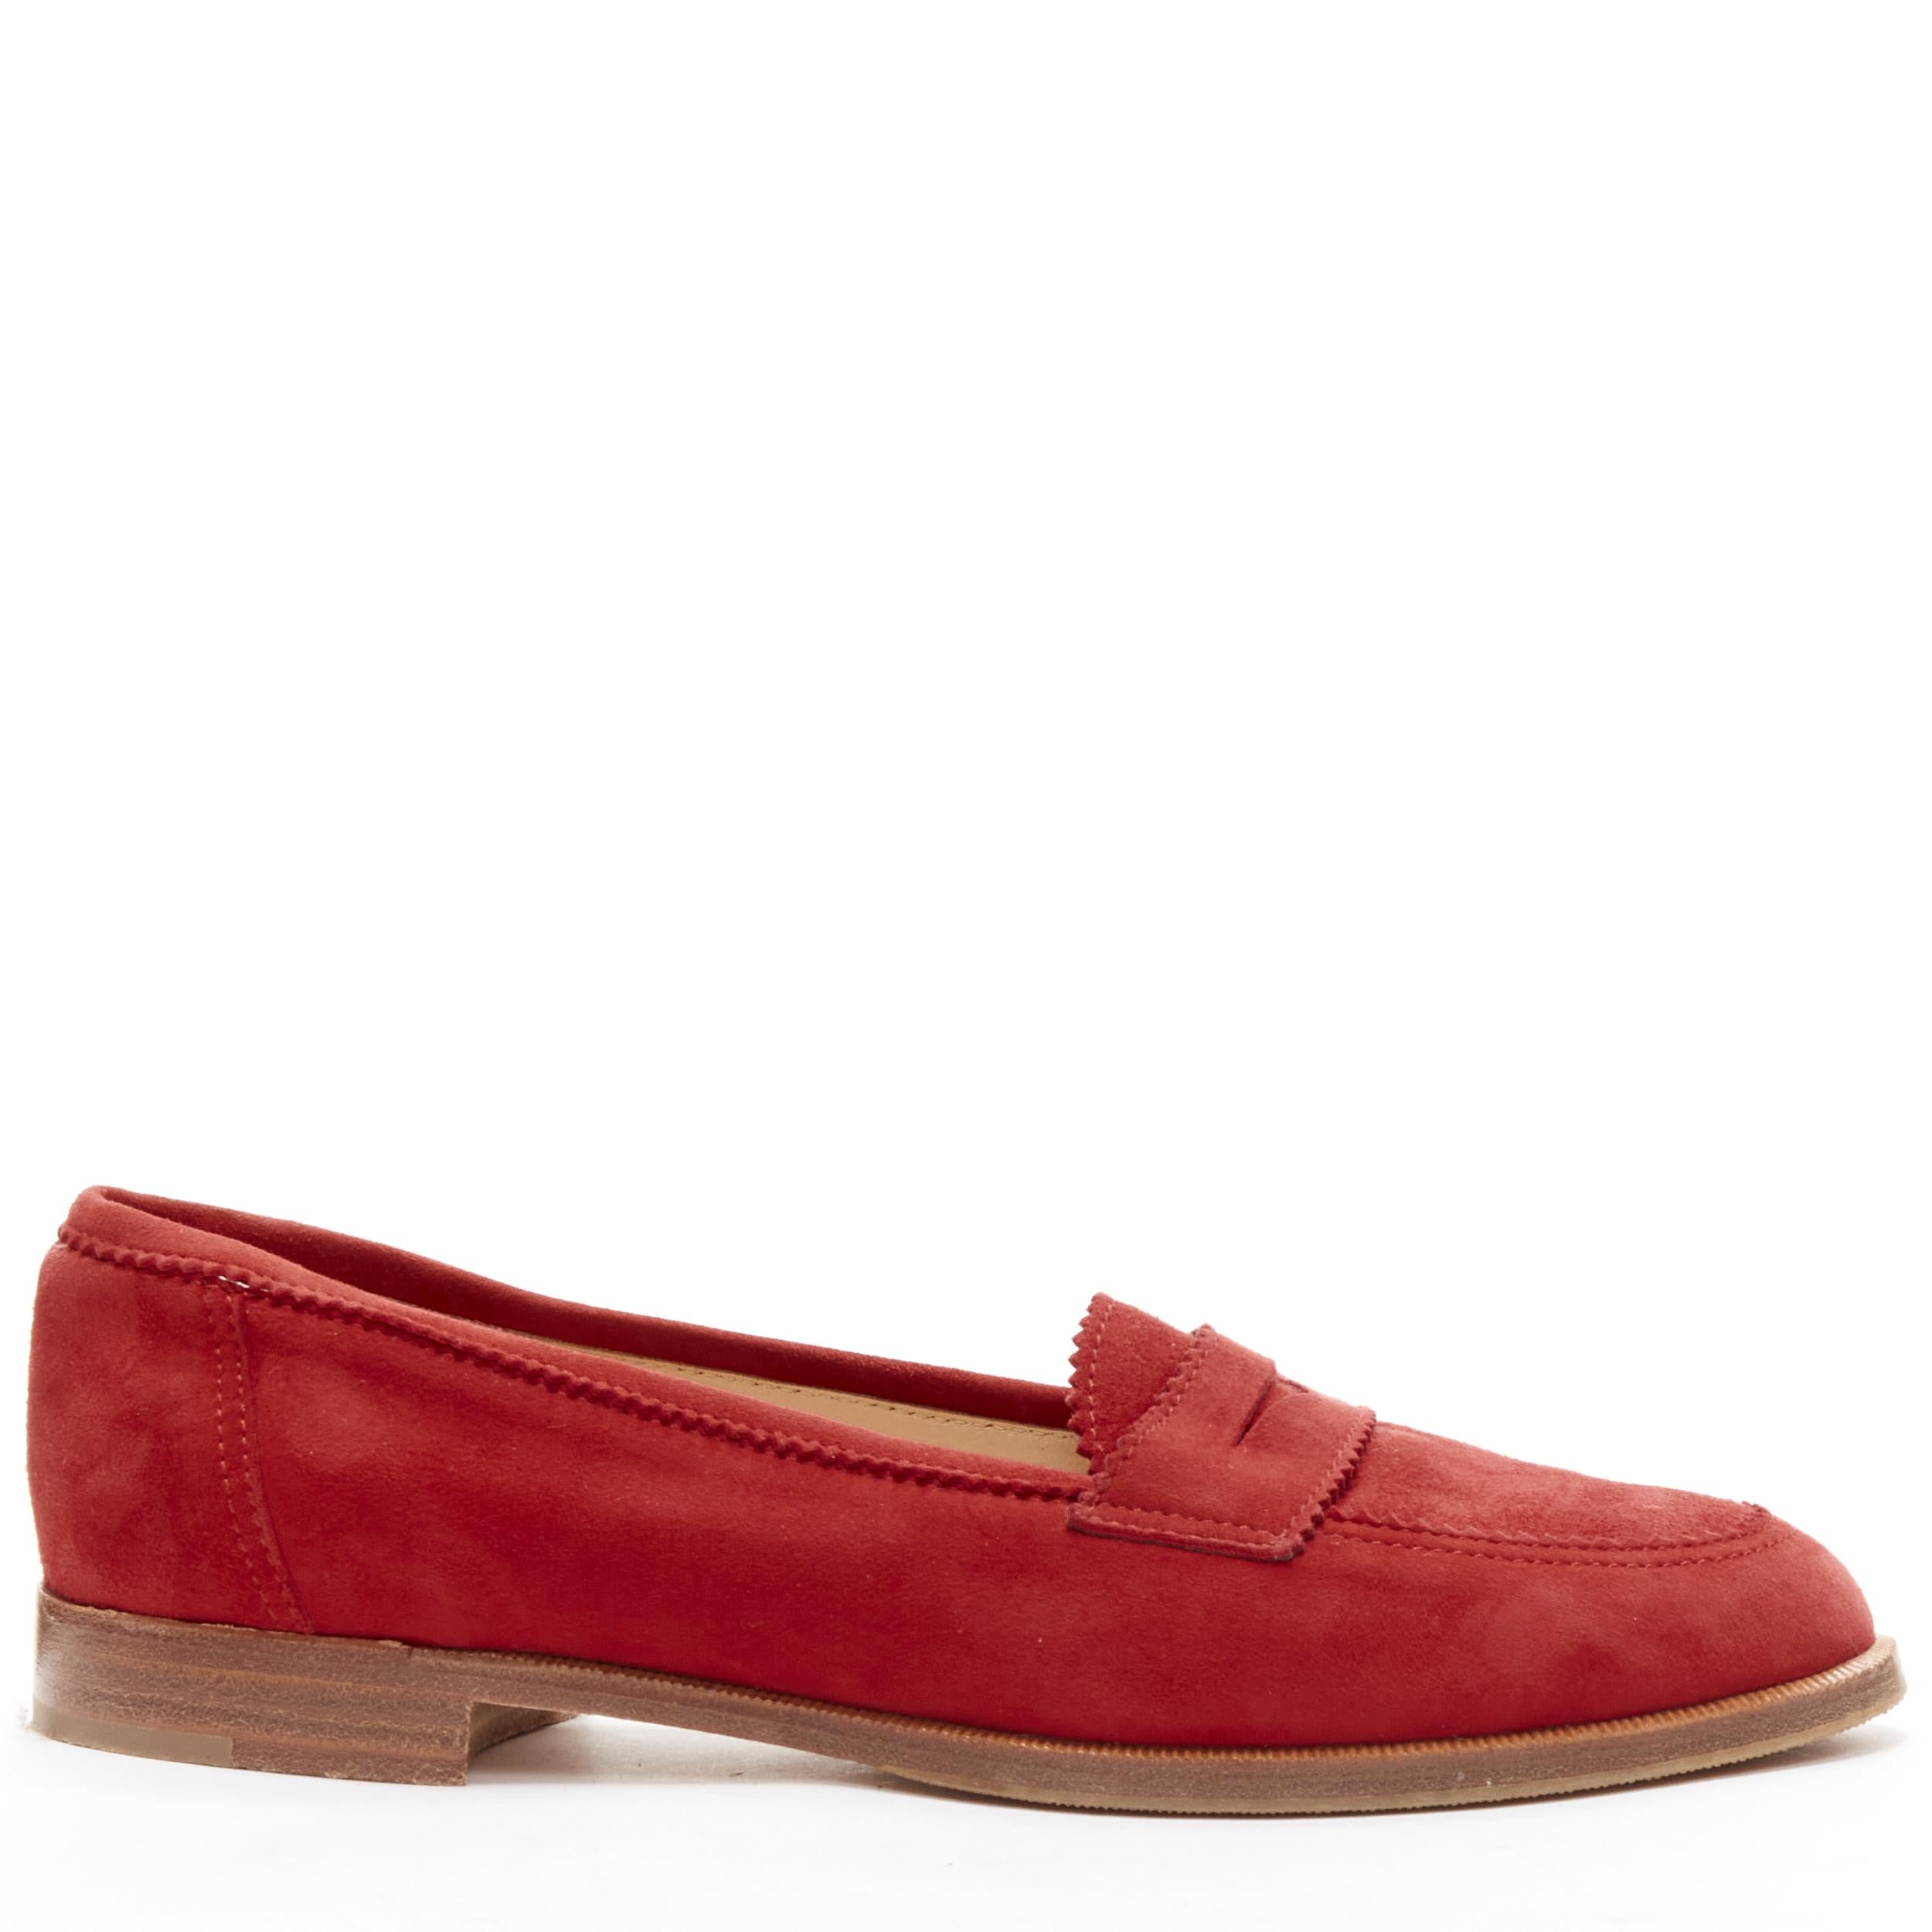 MANOLO BLAHNIK red suede leather classic penny loafer EU37
Reference: LNKO/A02095
Brand: Manolo Blahnik
Material: Suede
Color: Red, Brown
Pattern: Solid
Closure: Slip On
Lining: Leather
Extra Details: Stacked wooden sole.
Made in: